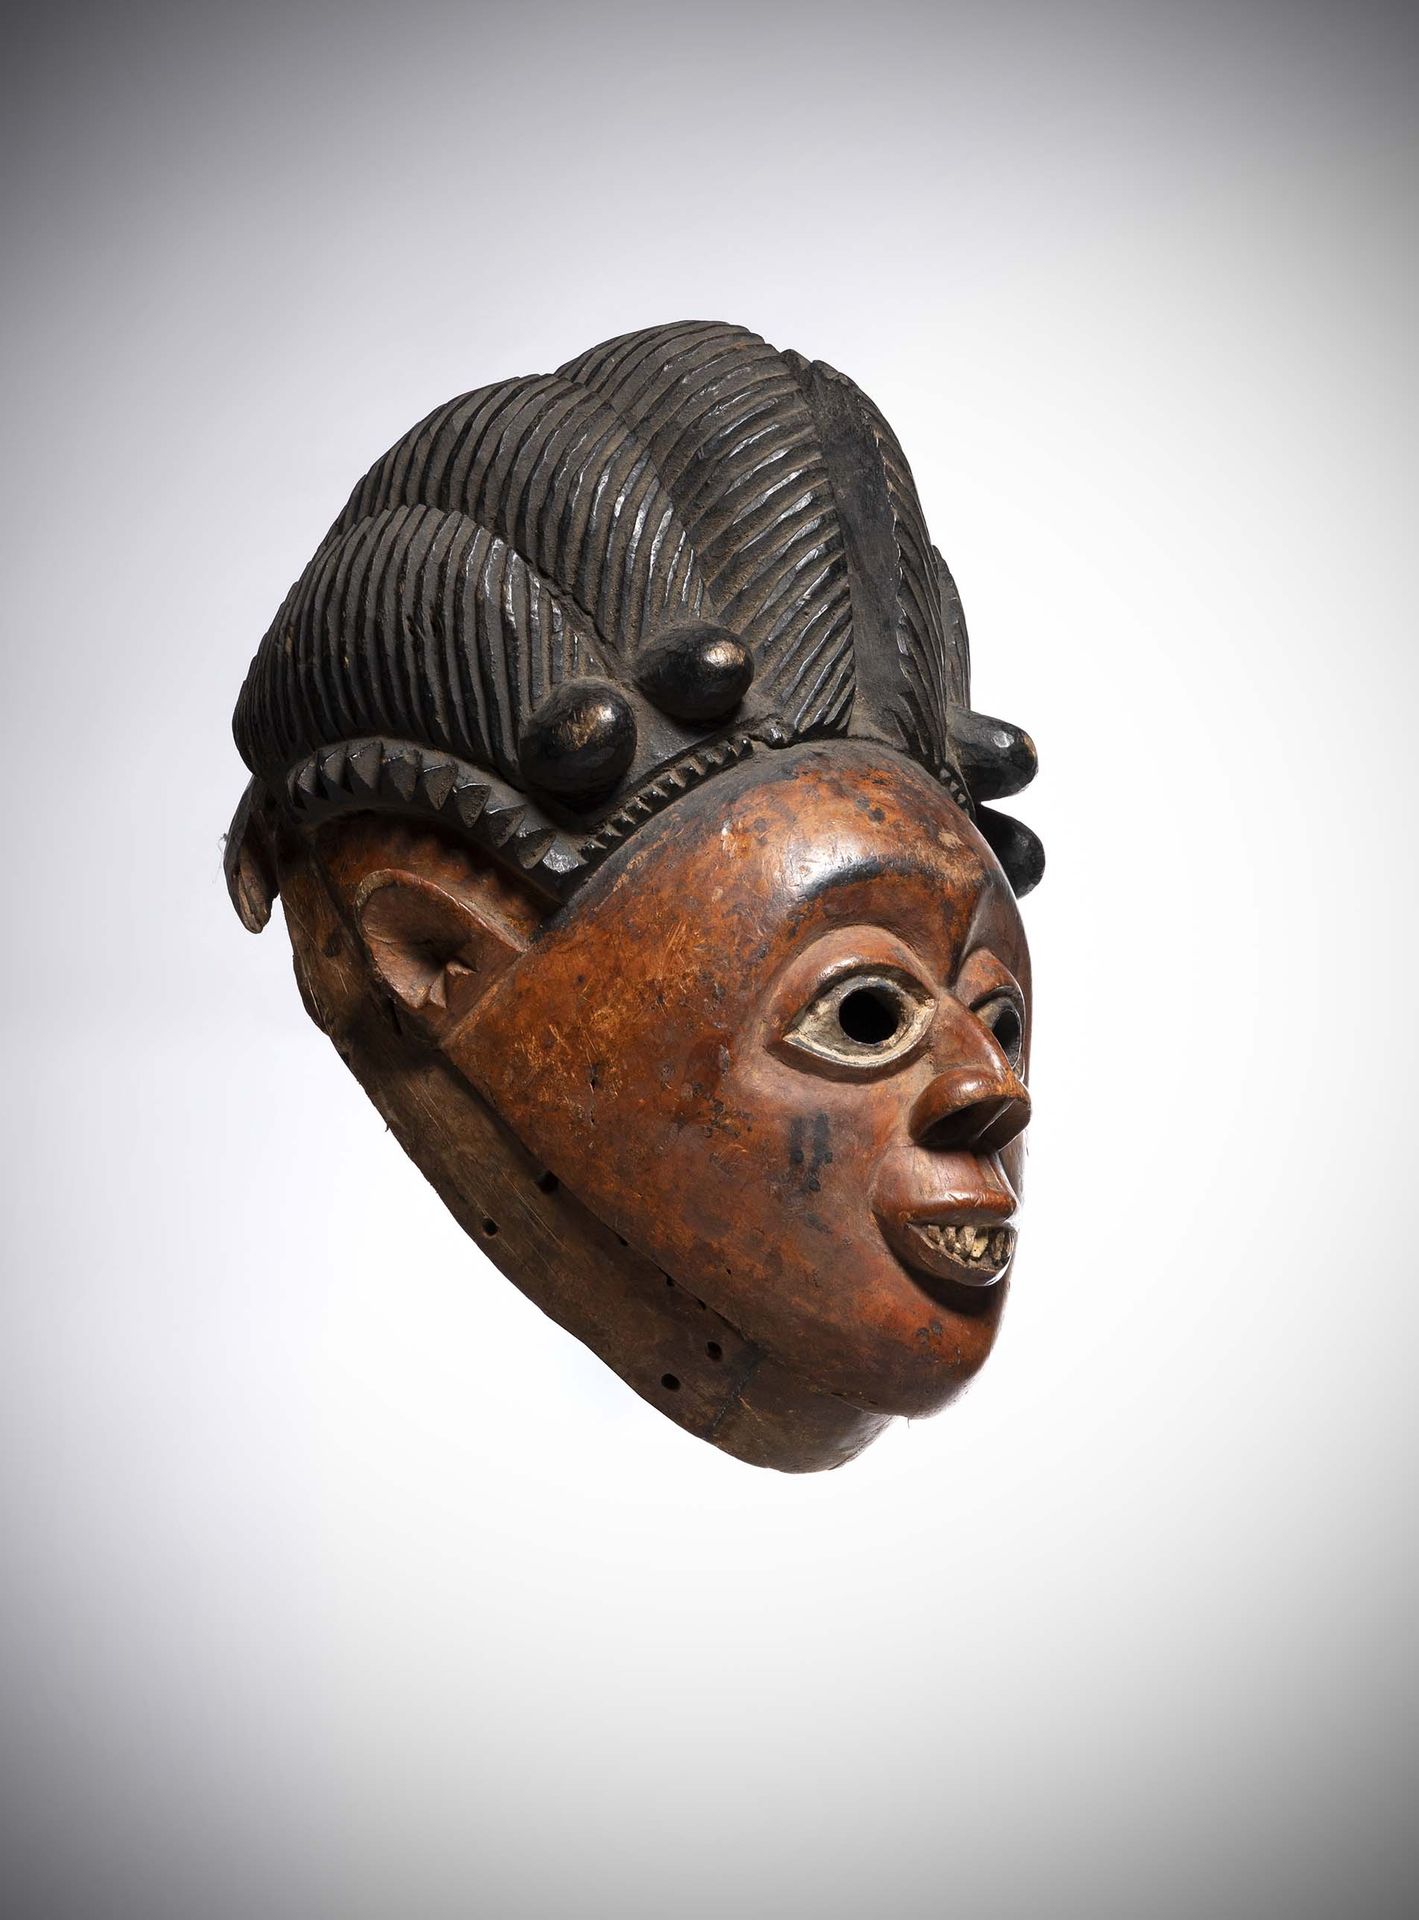 Null Bini

(Nigeria) Large mask with an expressive face topped by a hairstyle wi&hellip;